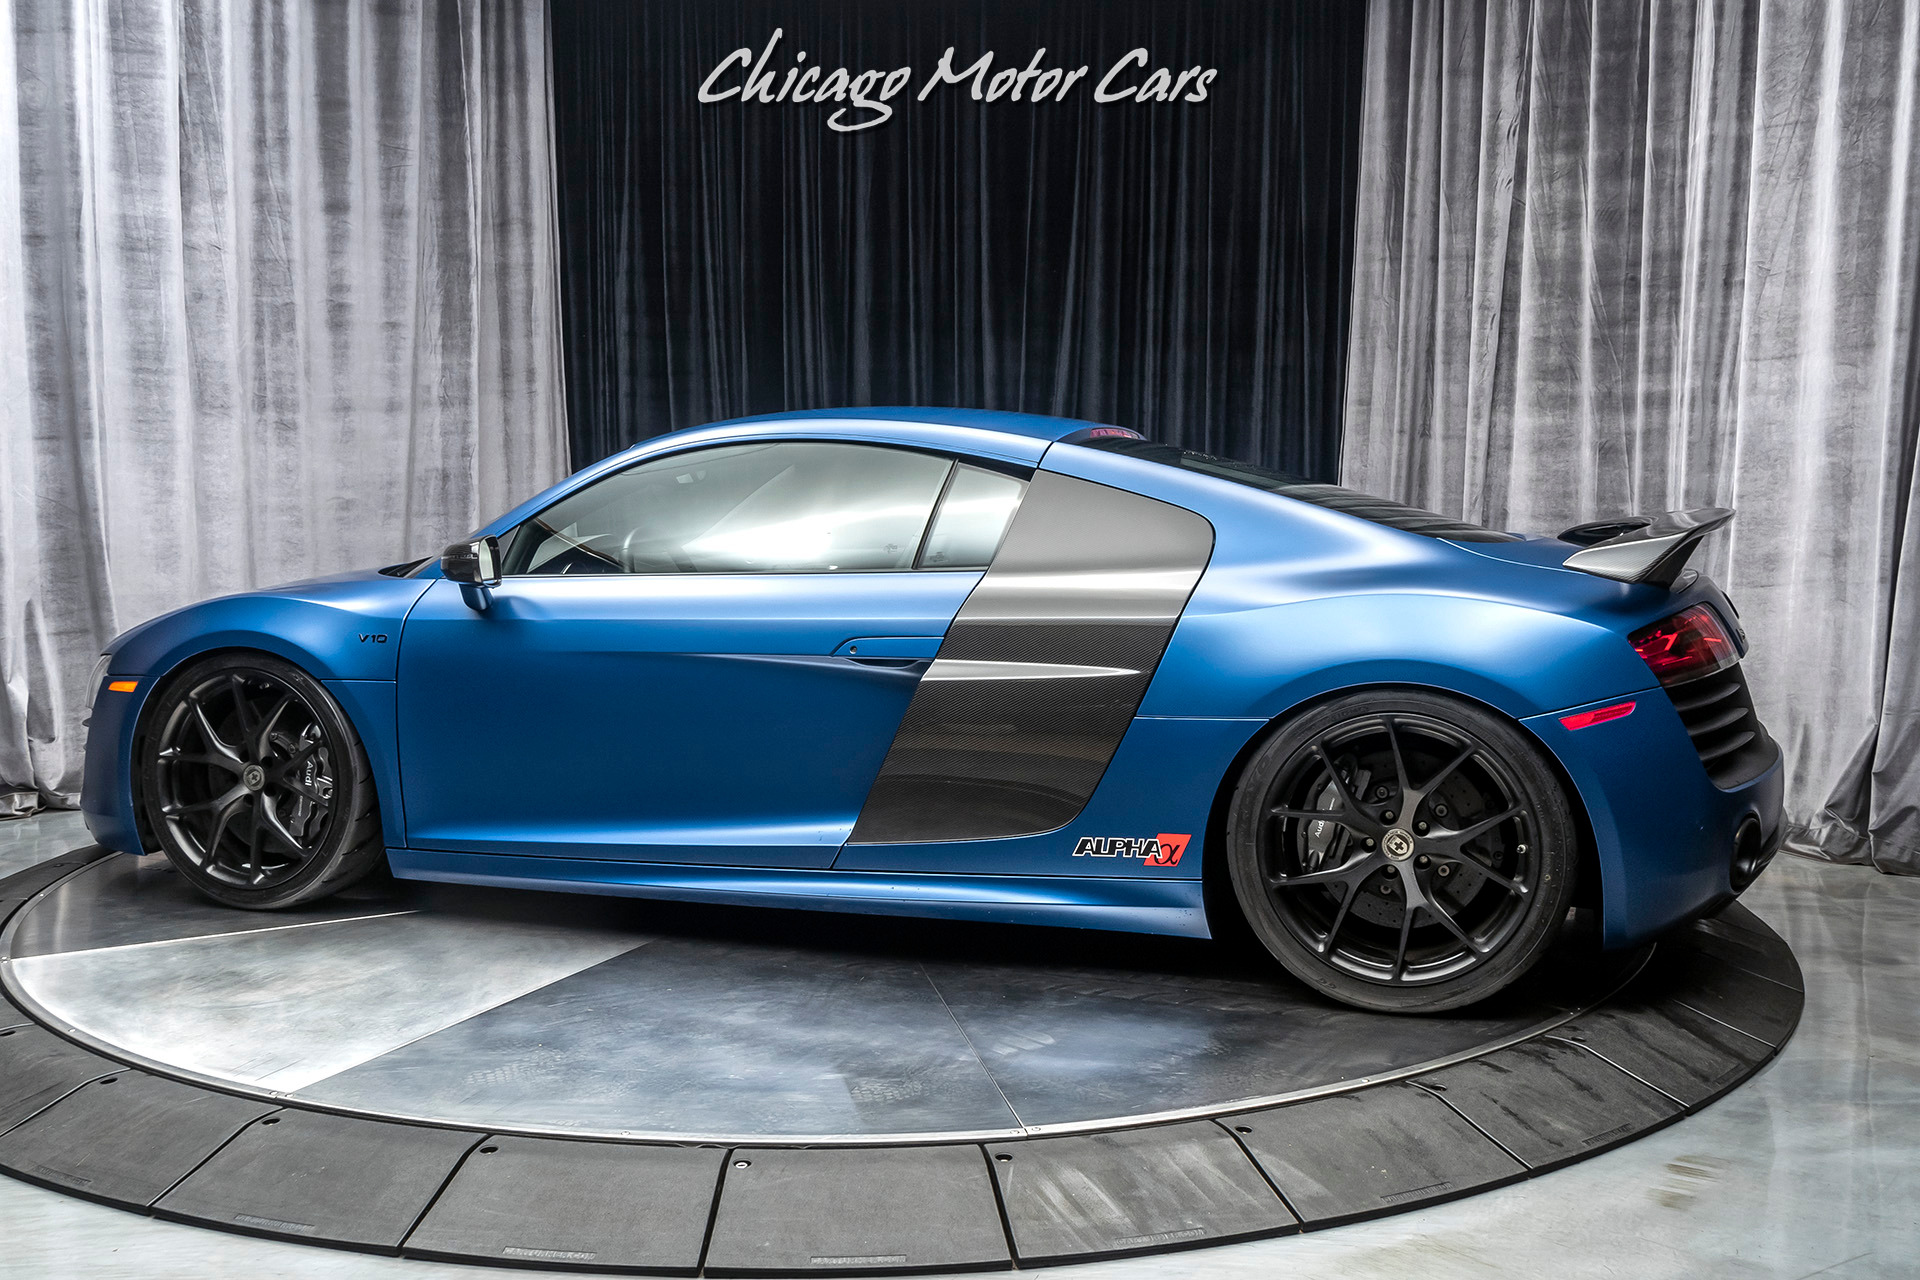 Used-2014-Audi-R8-V10-Plus-quattro-S-tronic-Coupe-1250-HP-AMS-TWIN-TURBO-BUILT